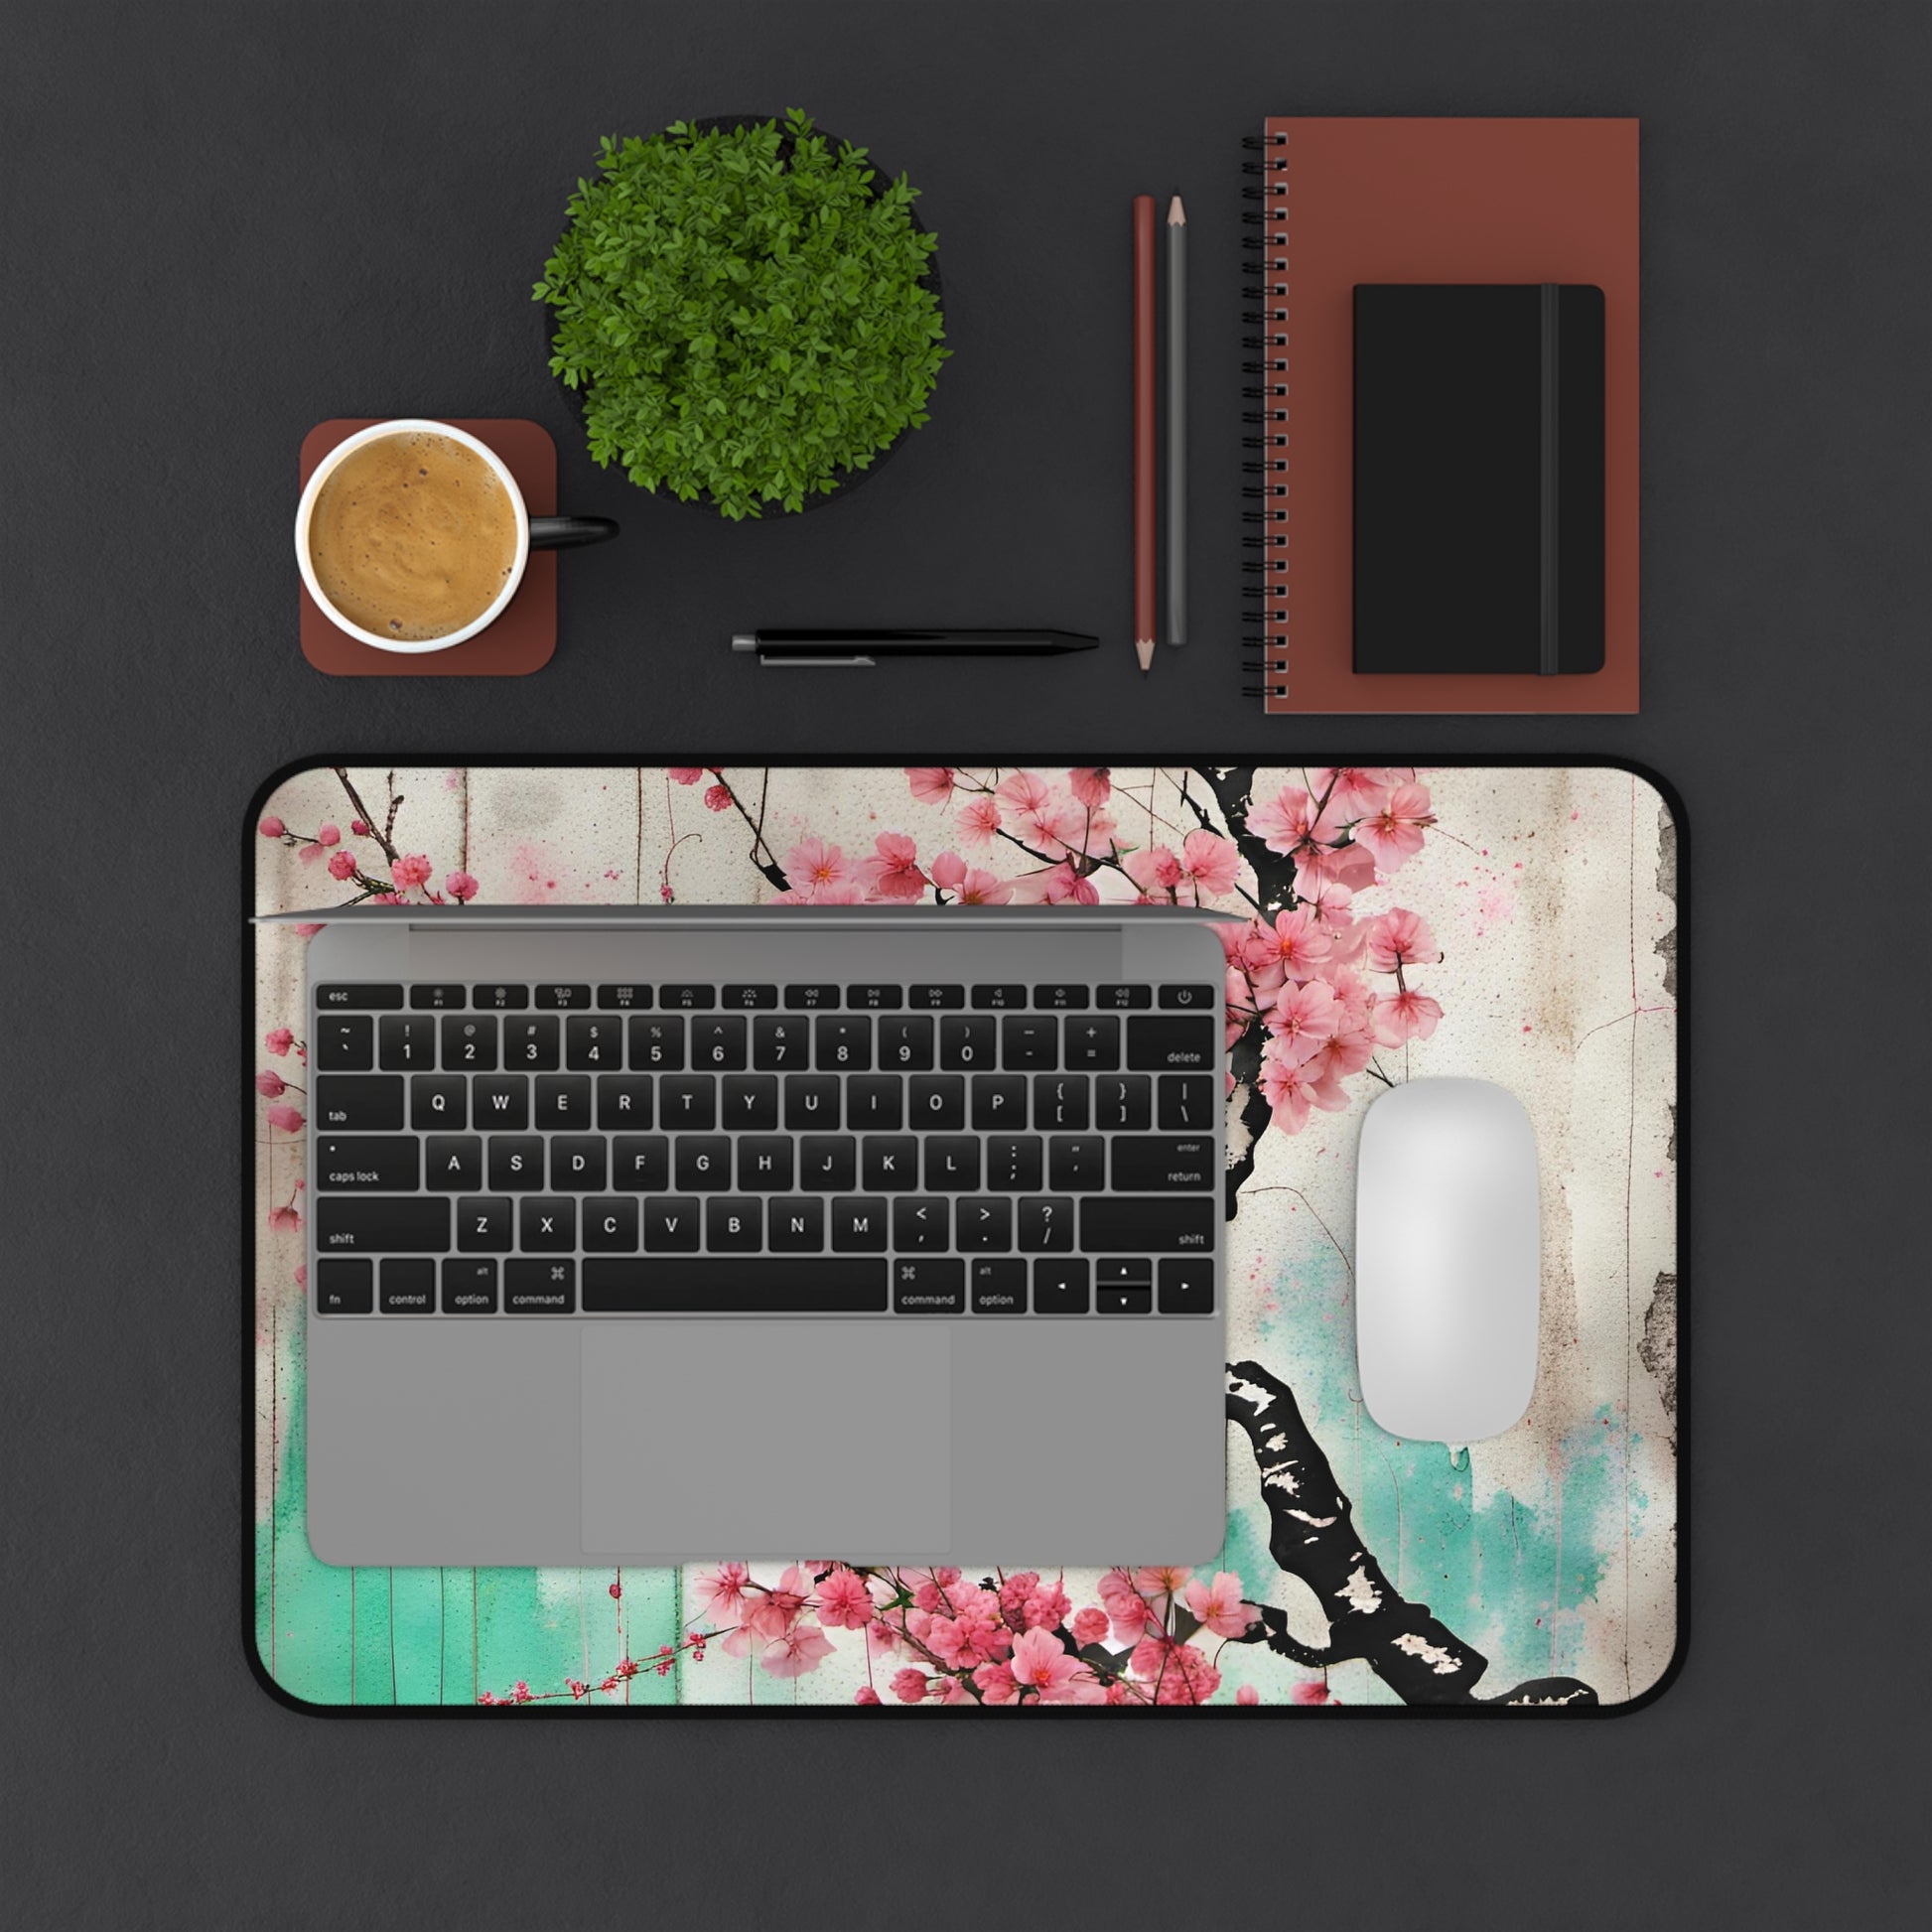 Cherry Blossoms Street Art Style Printed on Desk Mat 12x18 with computer